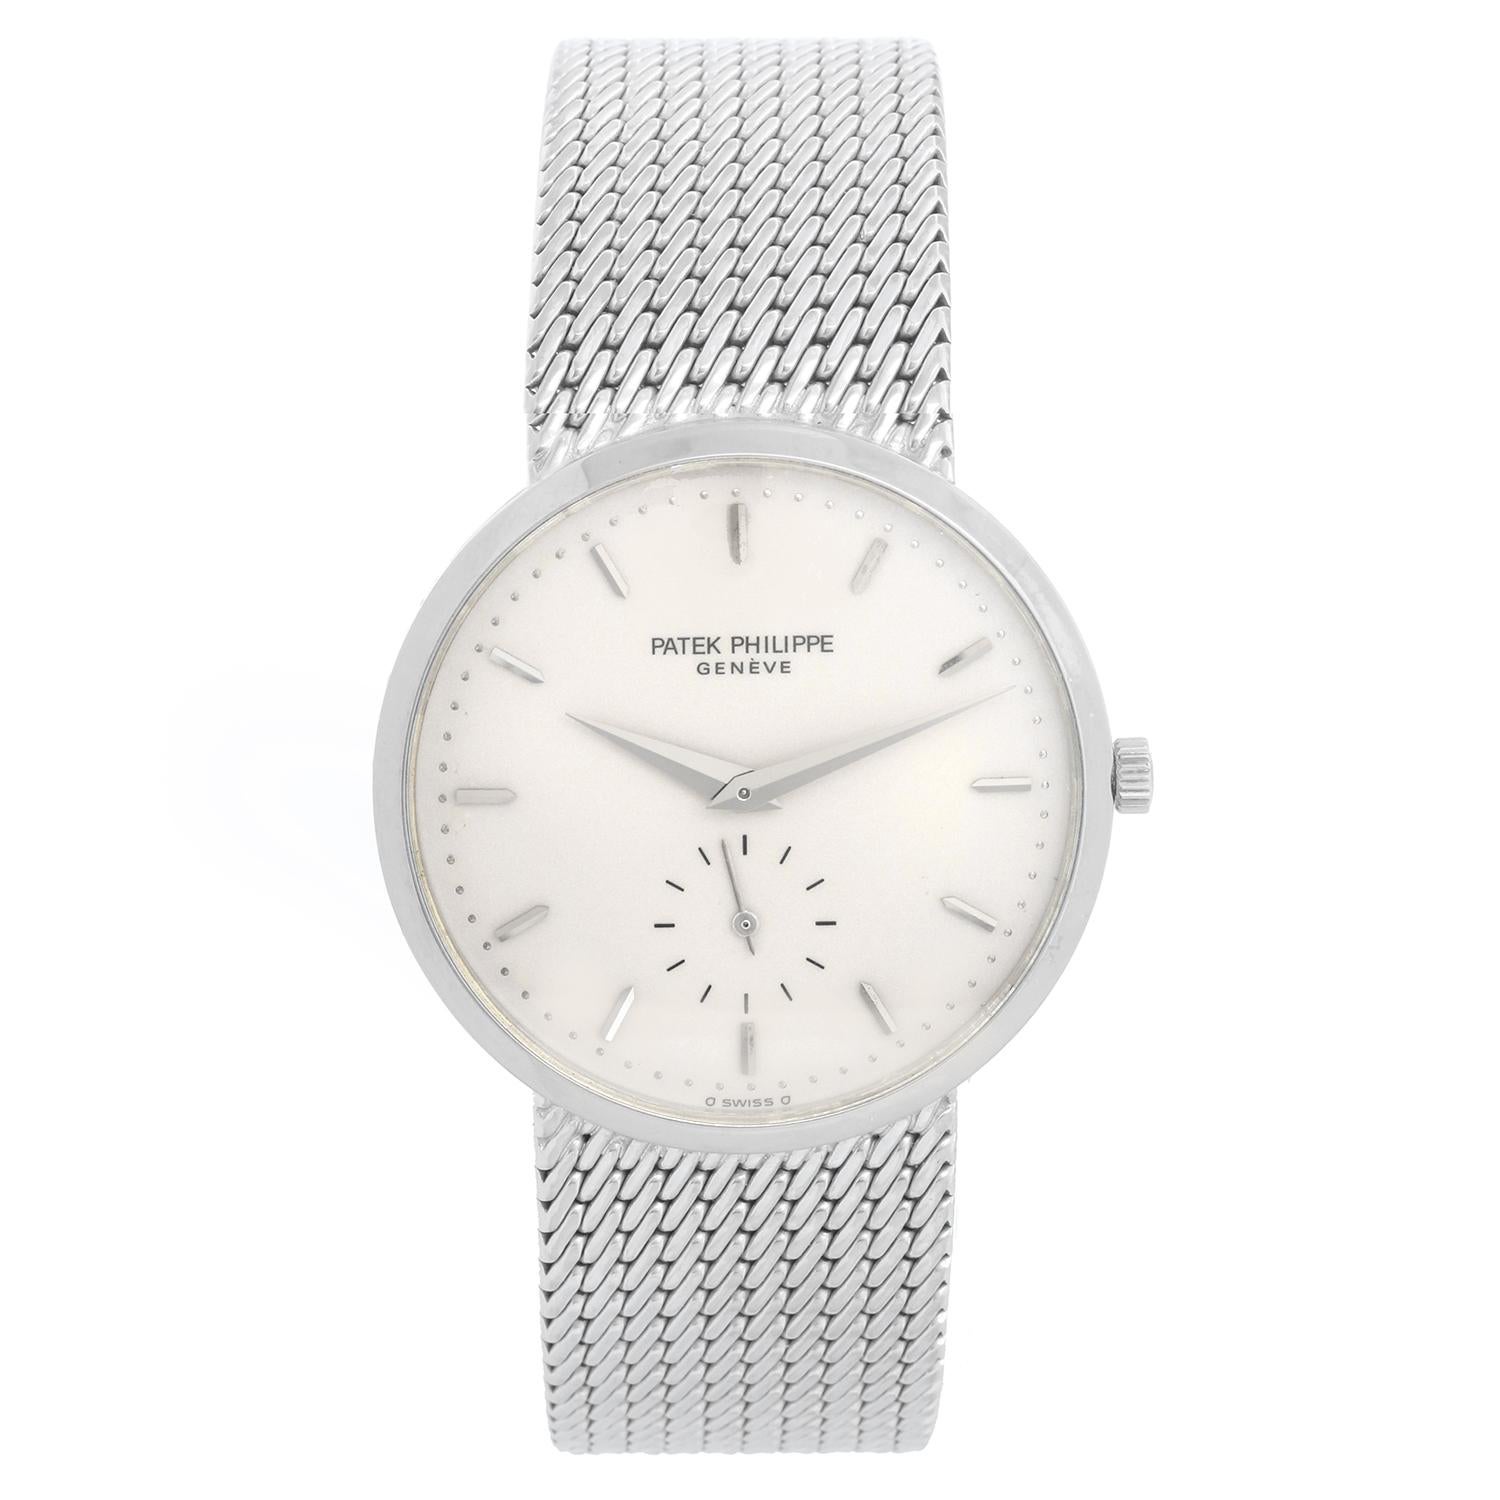 Patek Philippe Calatrava Men's 18k White Gold Watch. Ref. 3893 - Manual winding. 18k white gold case (33mm diameter). Enamel ivory colored dial with gold stick markers; subseconds dial at 6 o'clock position. Integrated 18k yellow gold bracelet. Fits